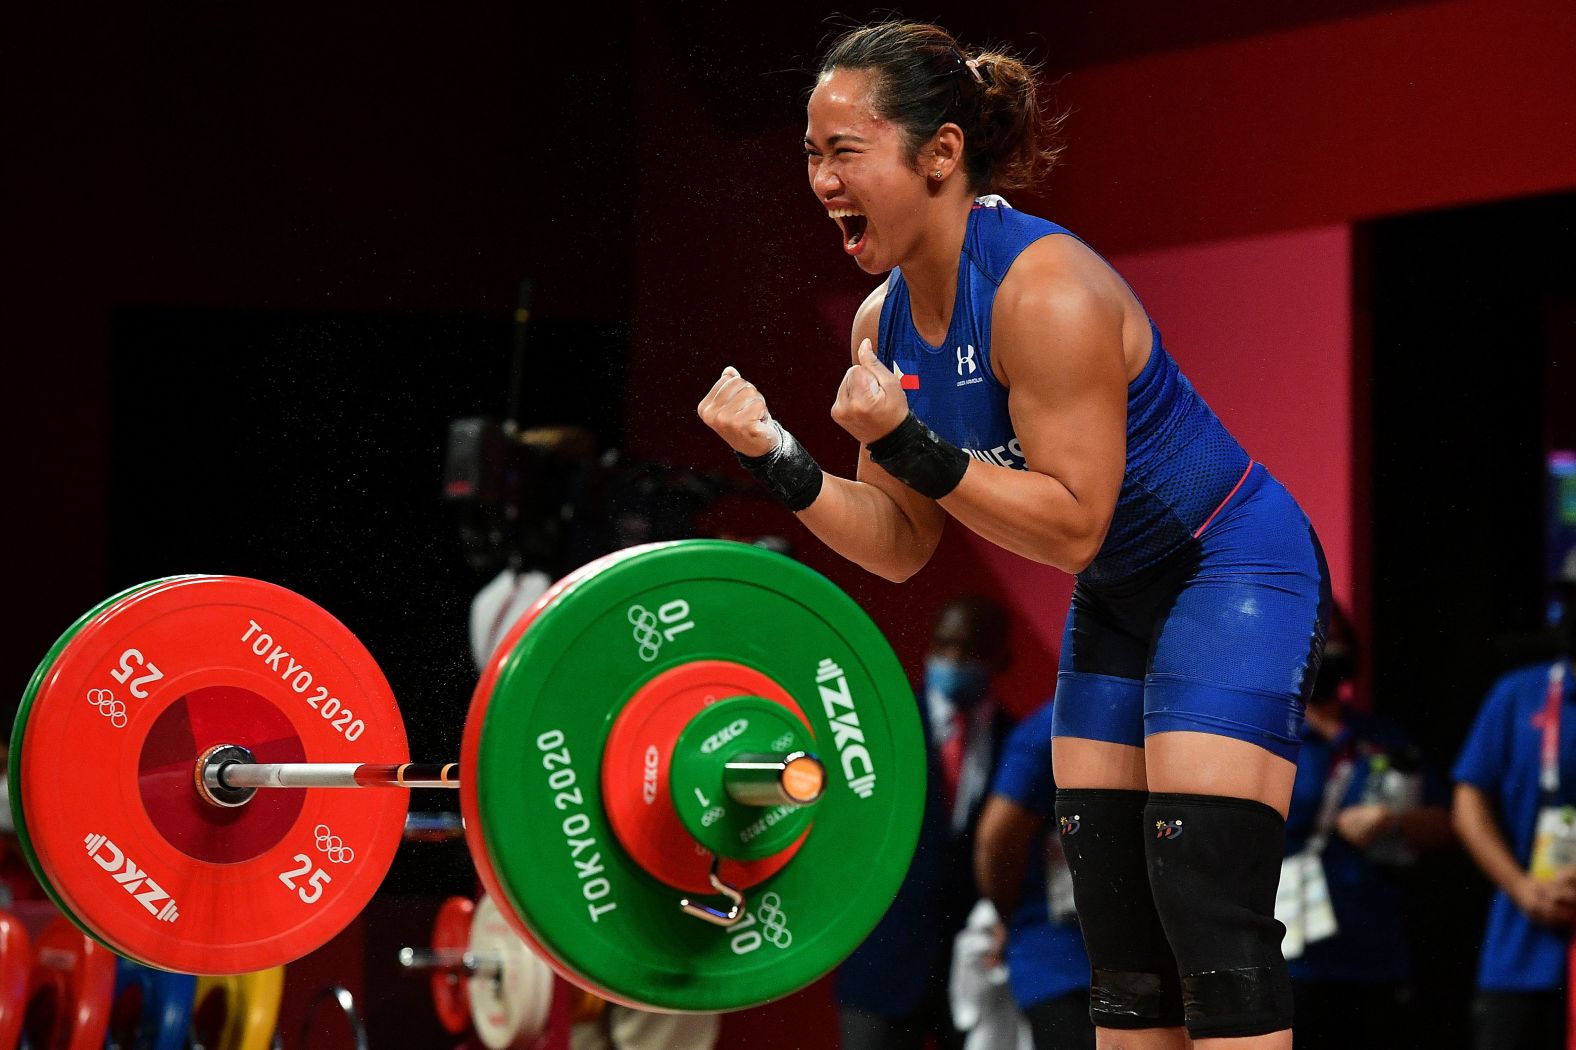 The Philippines' Hidilyn Diaz reacts after winning the 55-kilogram weightlifting competition on July 26. It's her country's <a href="index.php?page=&url=https%3A%2F%2Fwww.cnn.com%2Fworld%2Flive-news%2Ftokyo-2020-olympics-07-26-21-spt%2Fh_2d6ab10499b245fa129318ece8b8e5ef" target="_blank">first-ever Olympic gold medal.</a> Prior to Diaz's gold, the Philippines had claimed three silvers and seven bronzes. Diaz won one of the silvers in the 2016 Olympics.